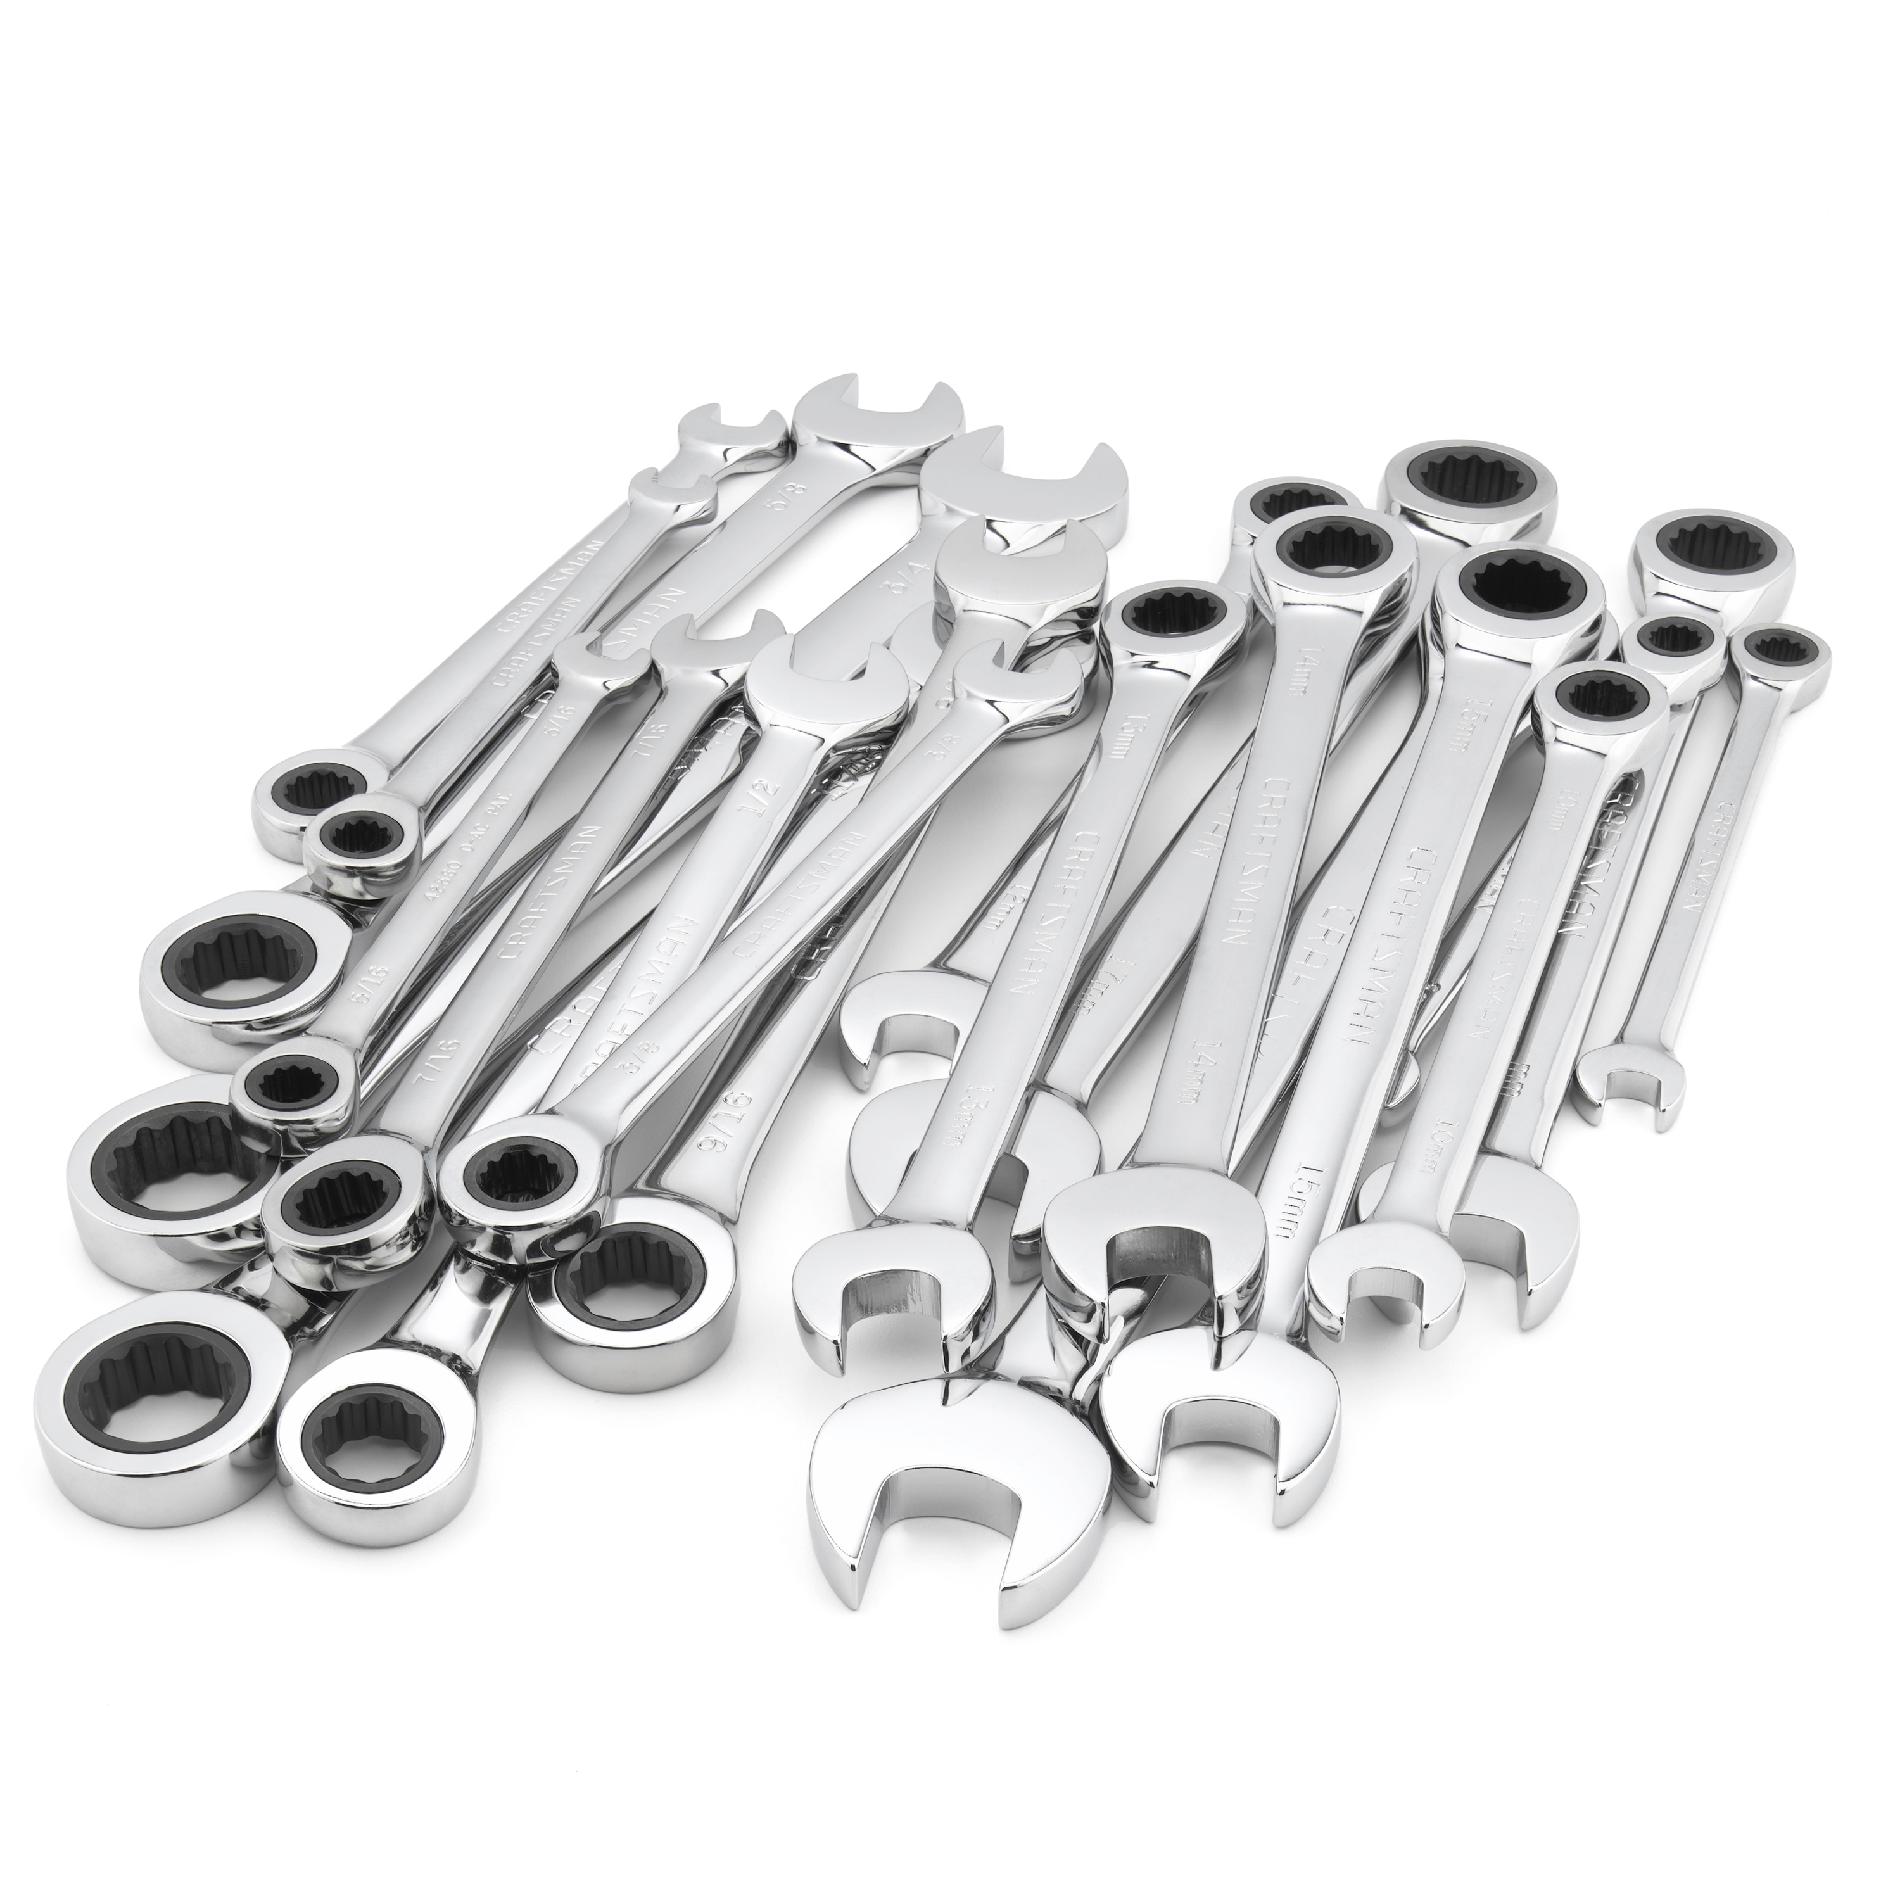 Color : 12mm Wrench Ratchet Combination Metric Wrench Set Tooth Gear Ring Torque and Wrench Set Tools for Repair A Set of Wrench Fastening tool 